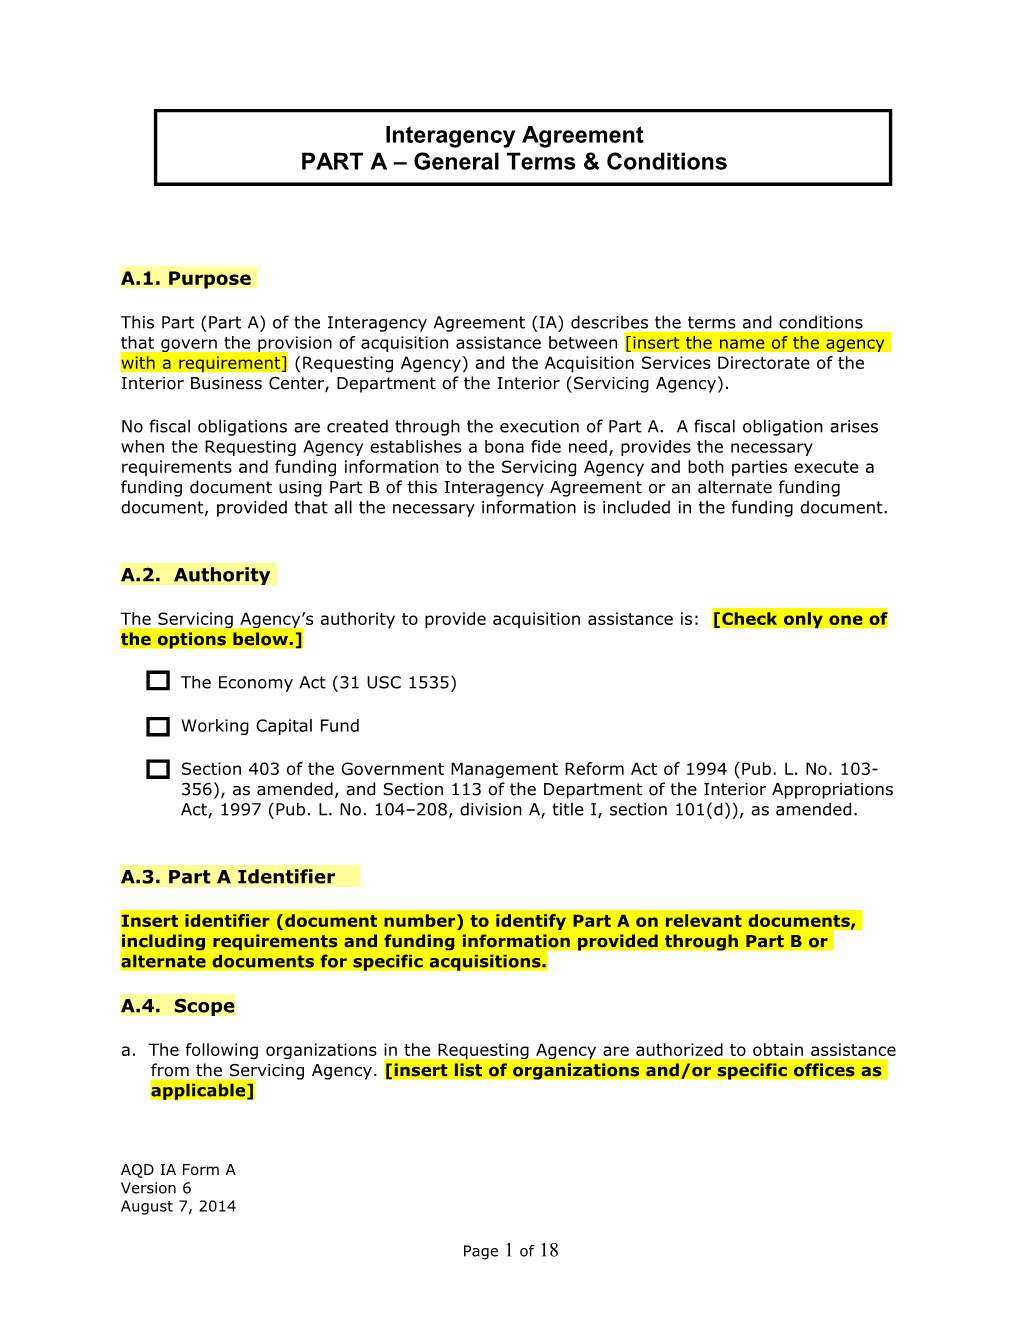 Part a OCIO and AQD - FY14 Policy Changes 3-3-14